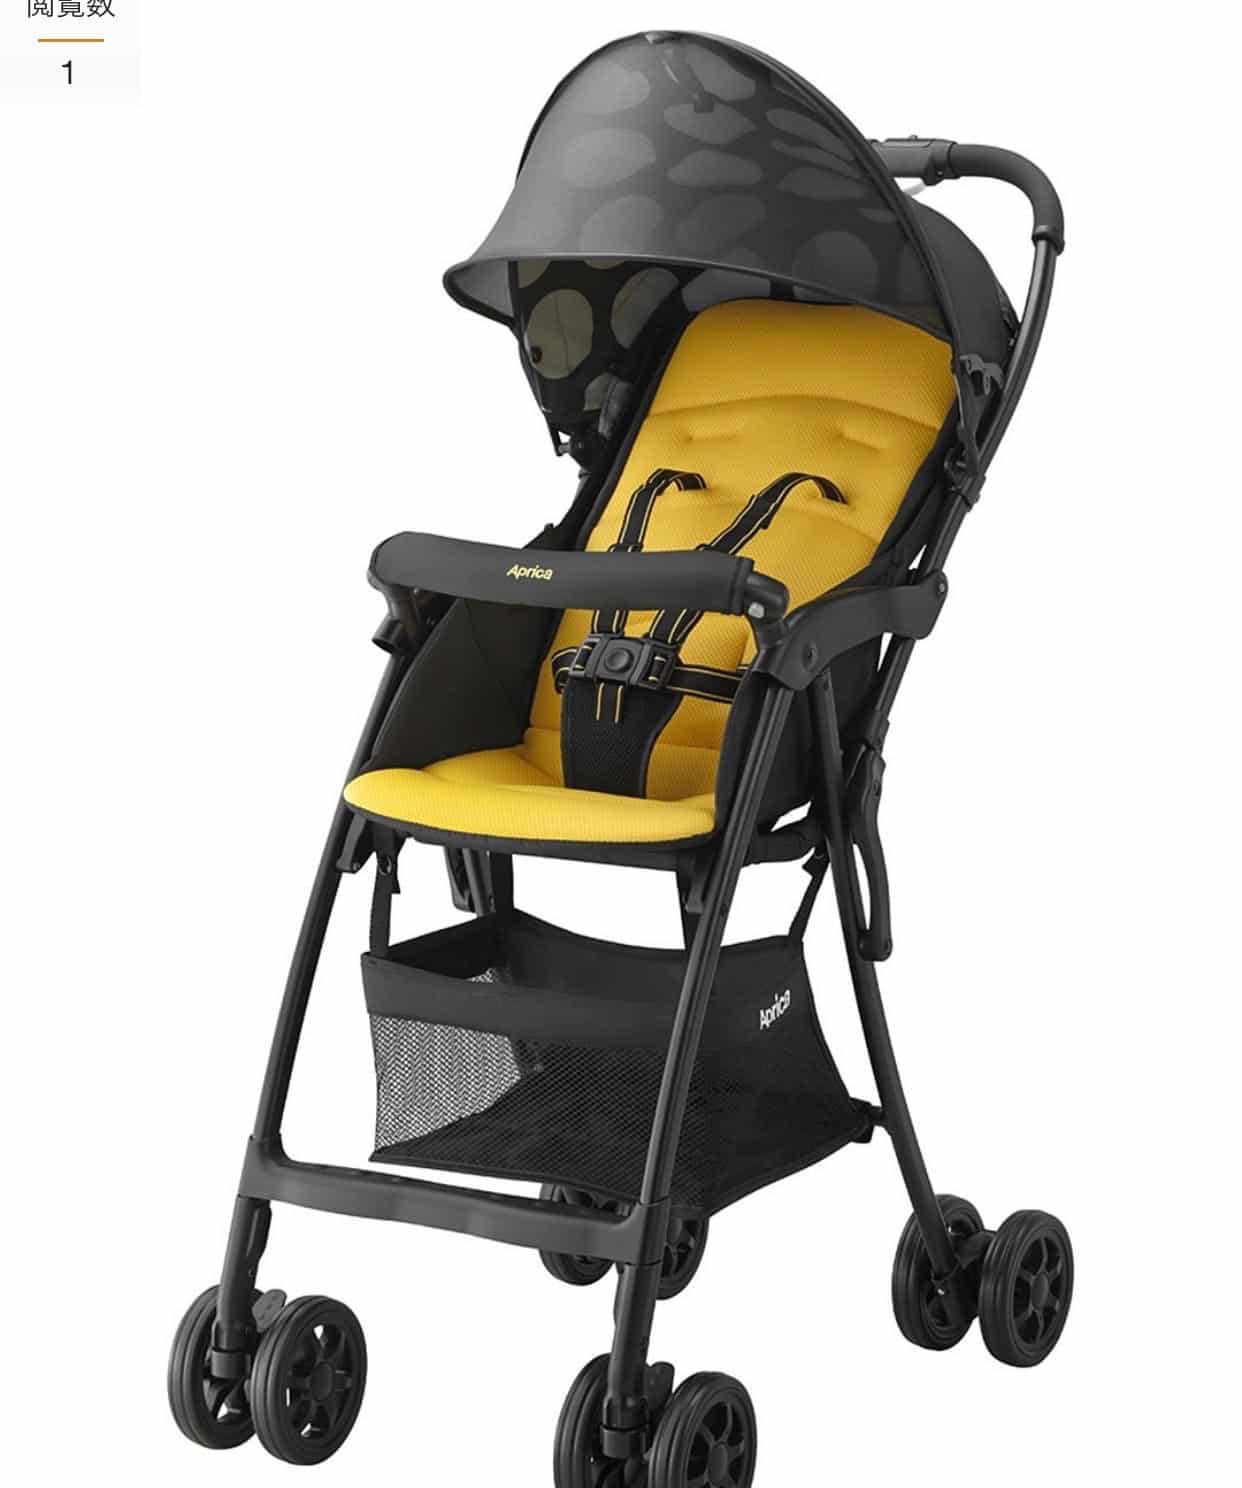 buy cheap pushchairs online